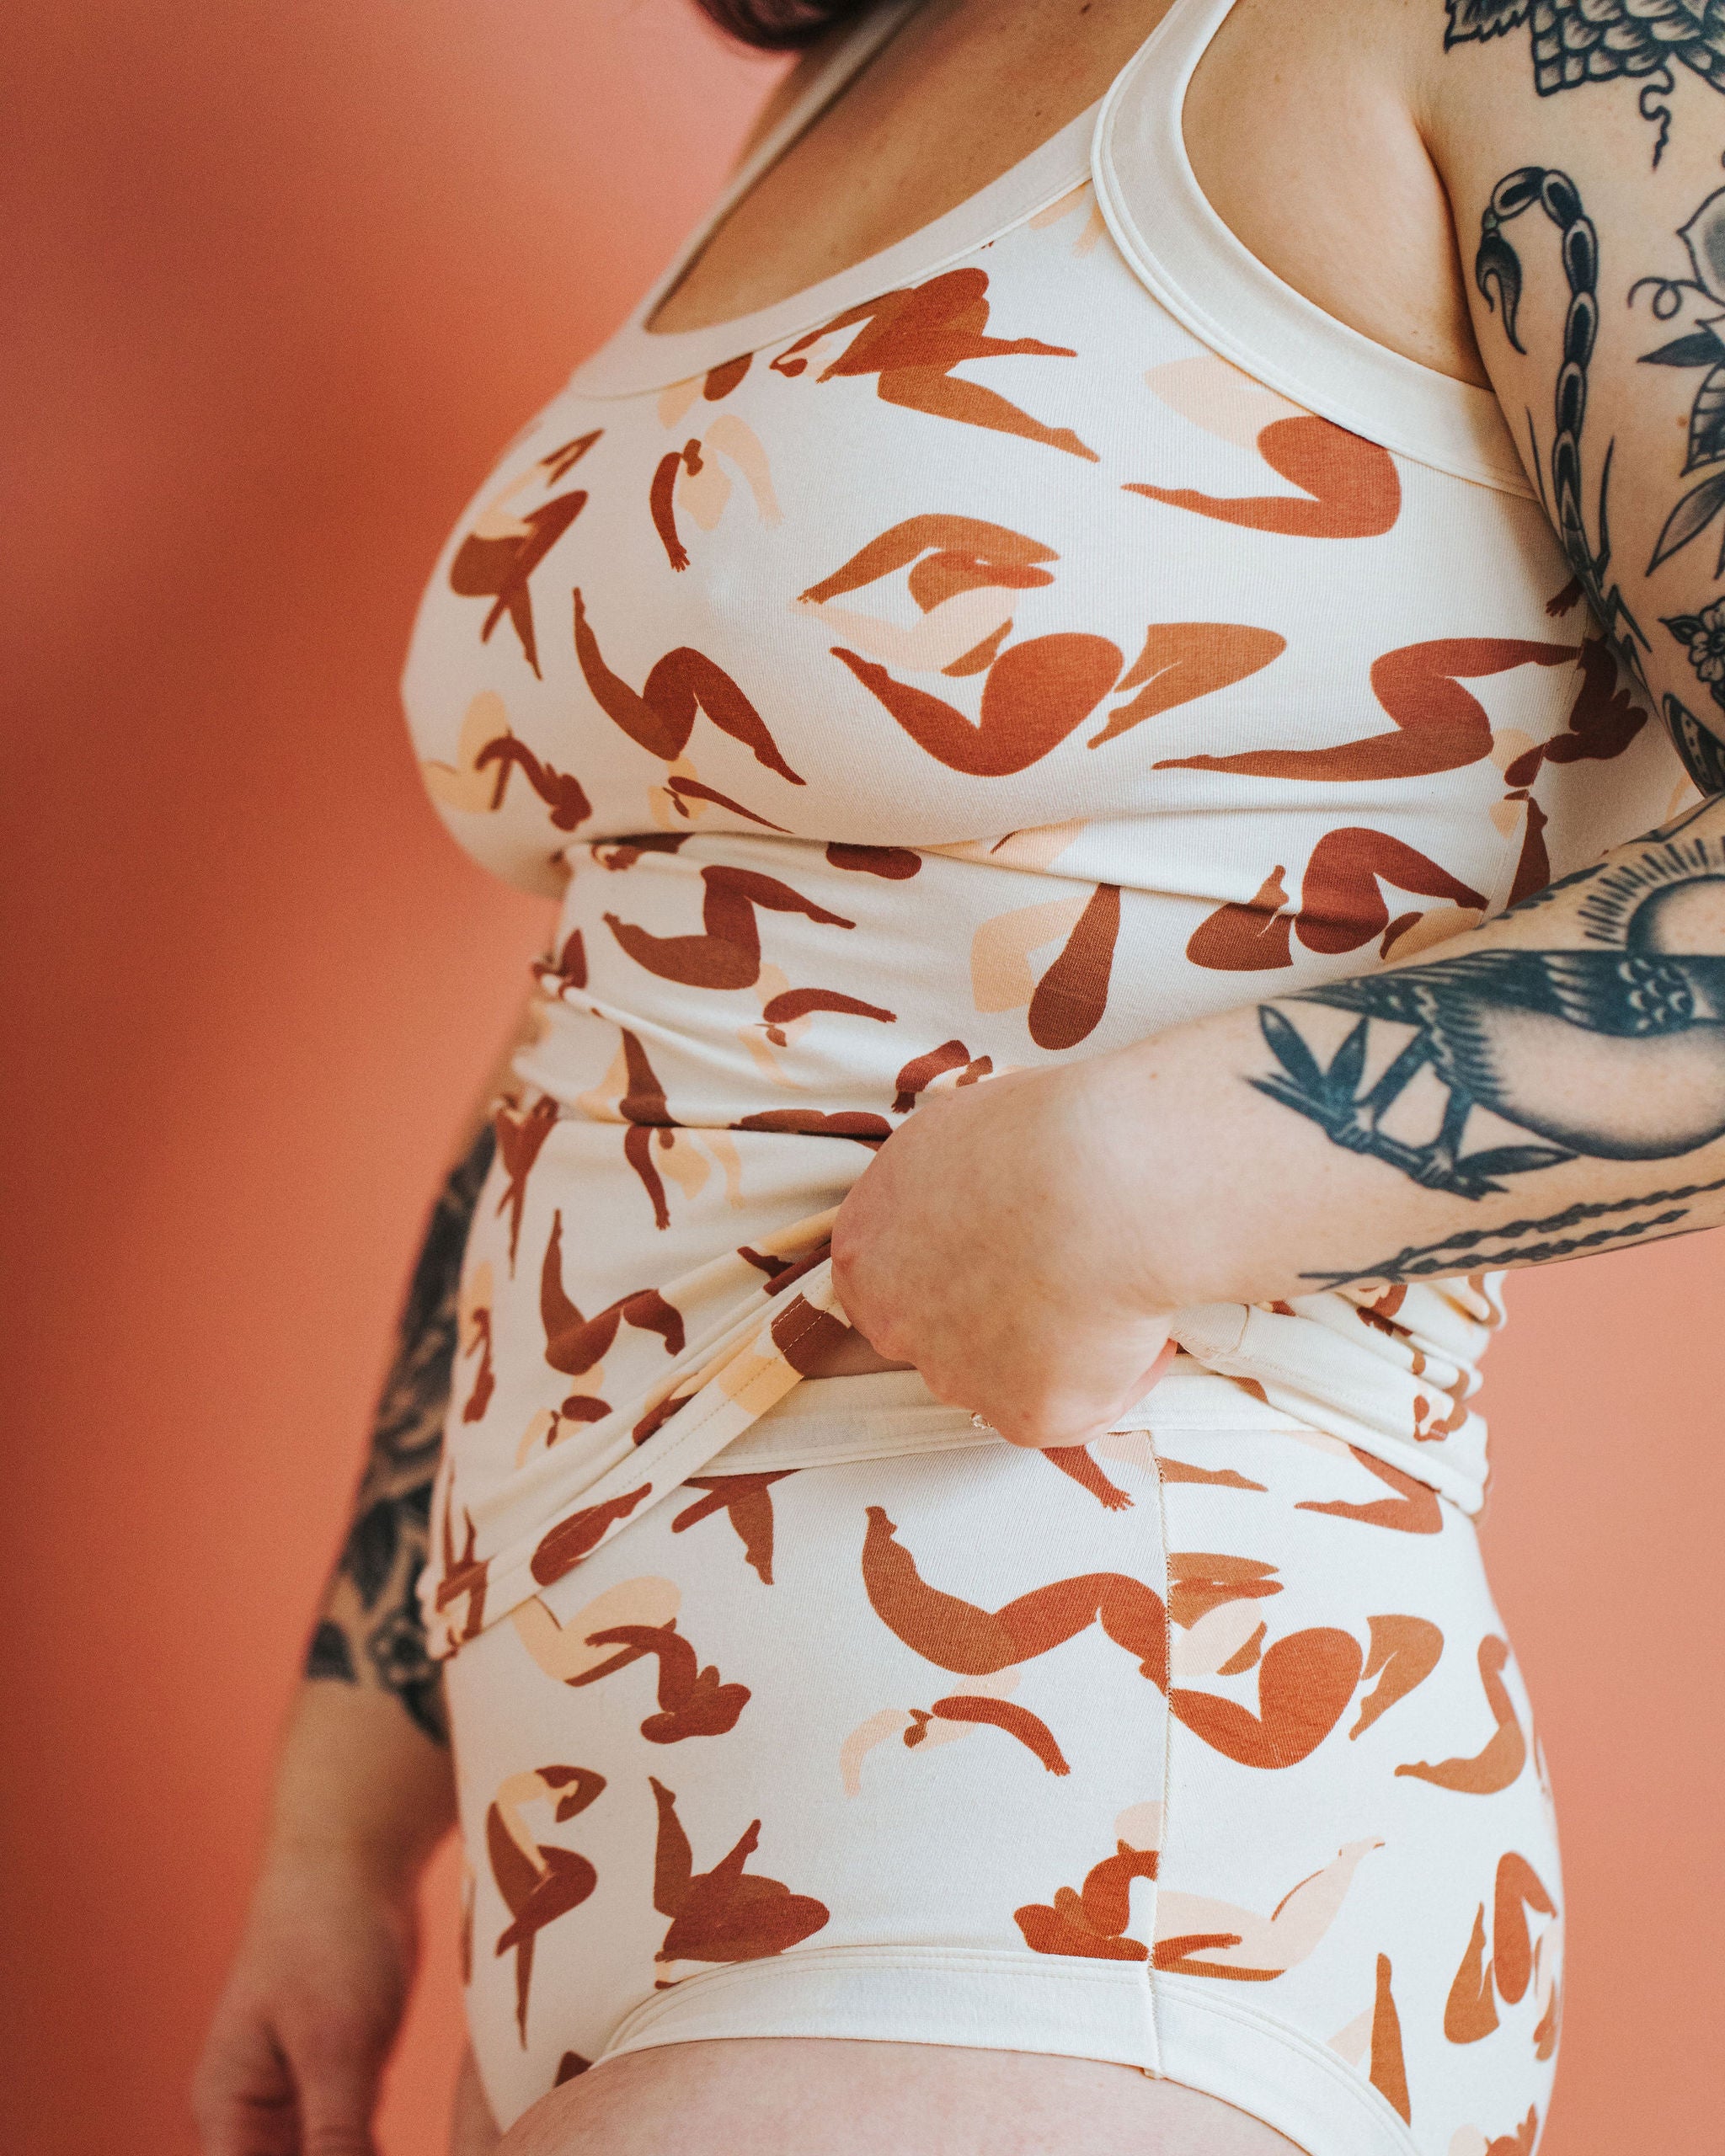 Cami Bodies in Motion – Thunderpants USA